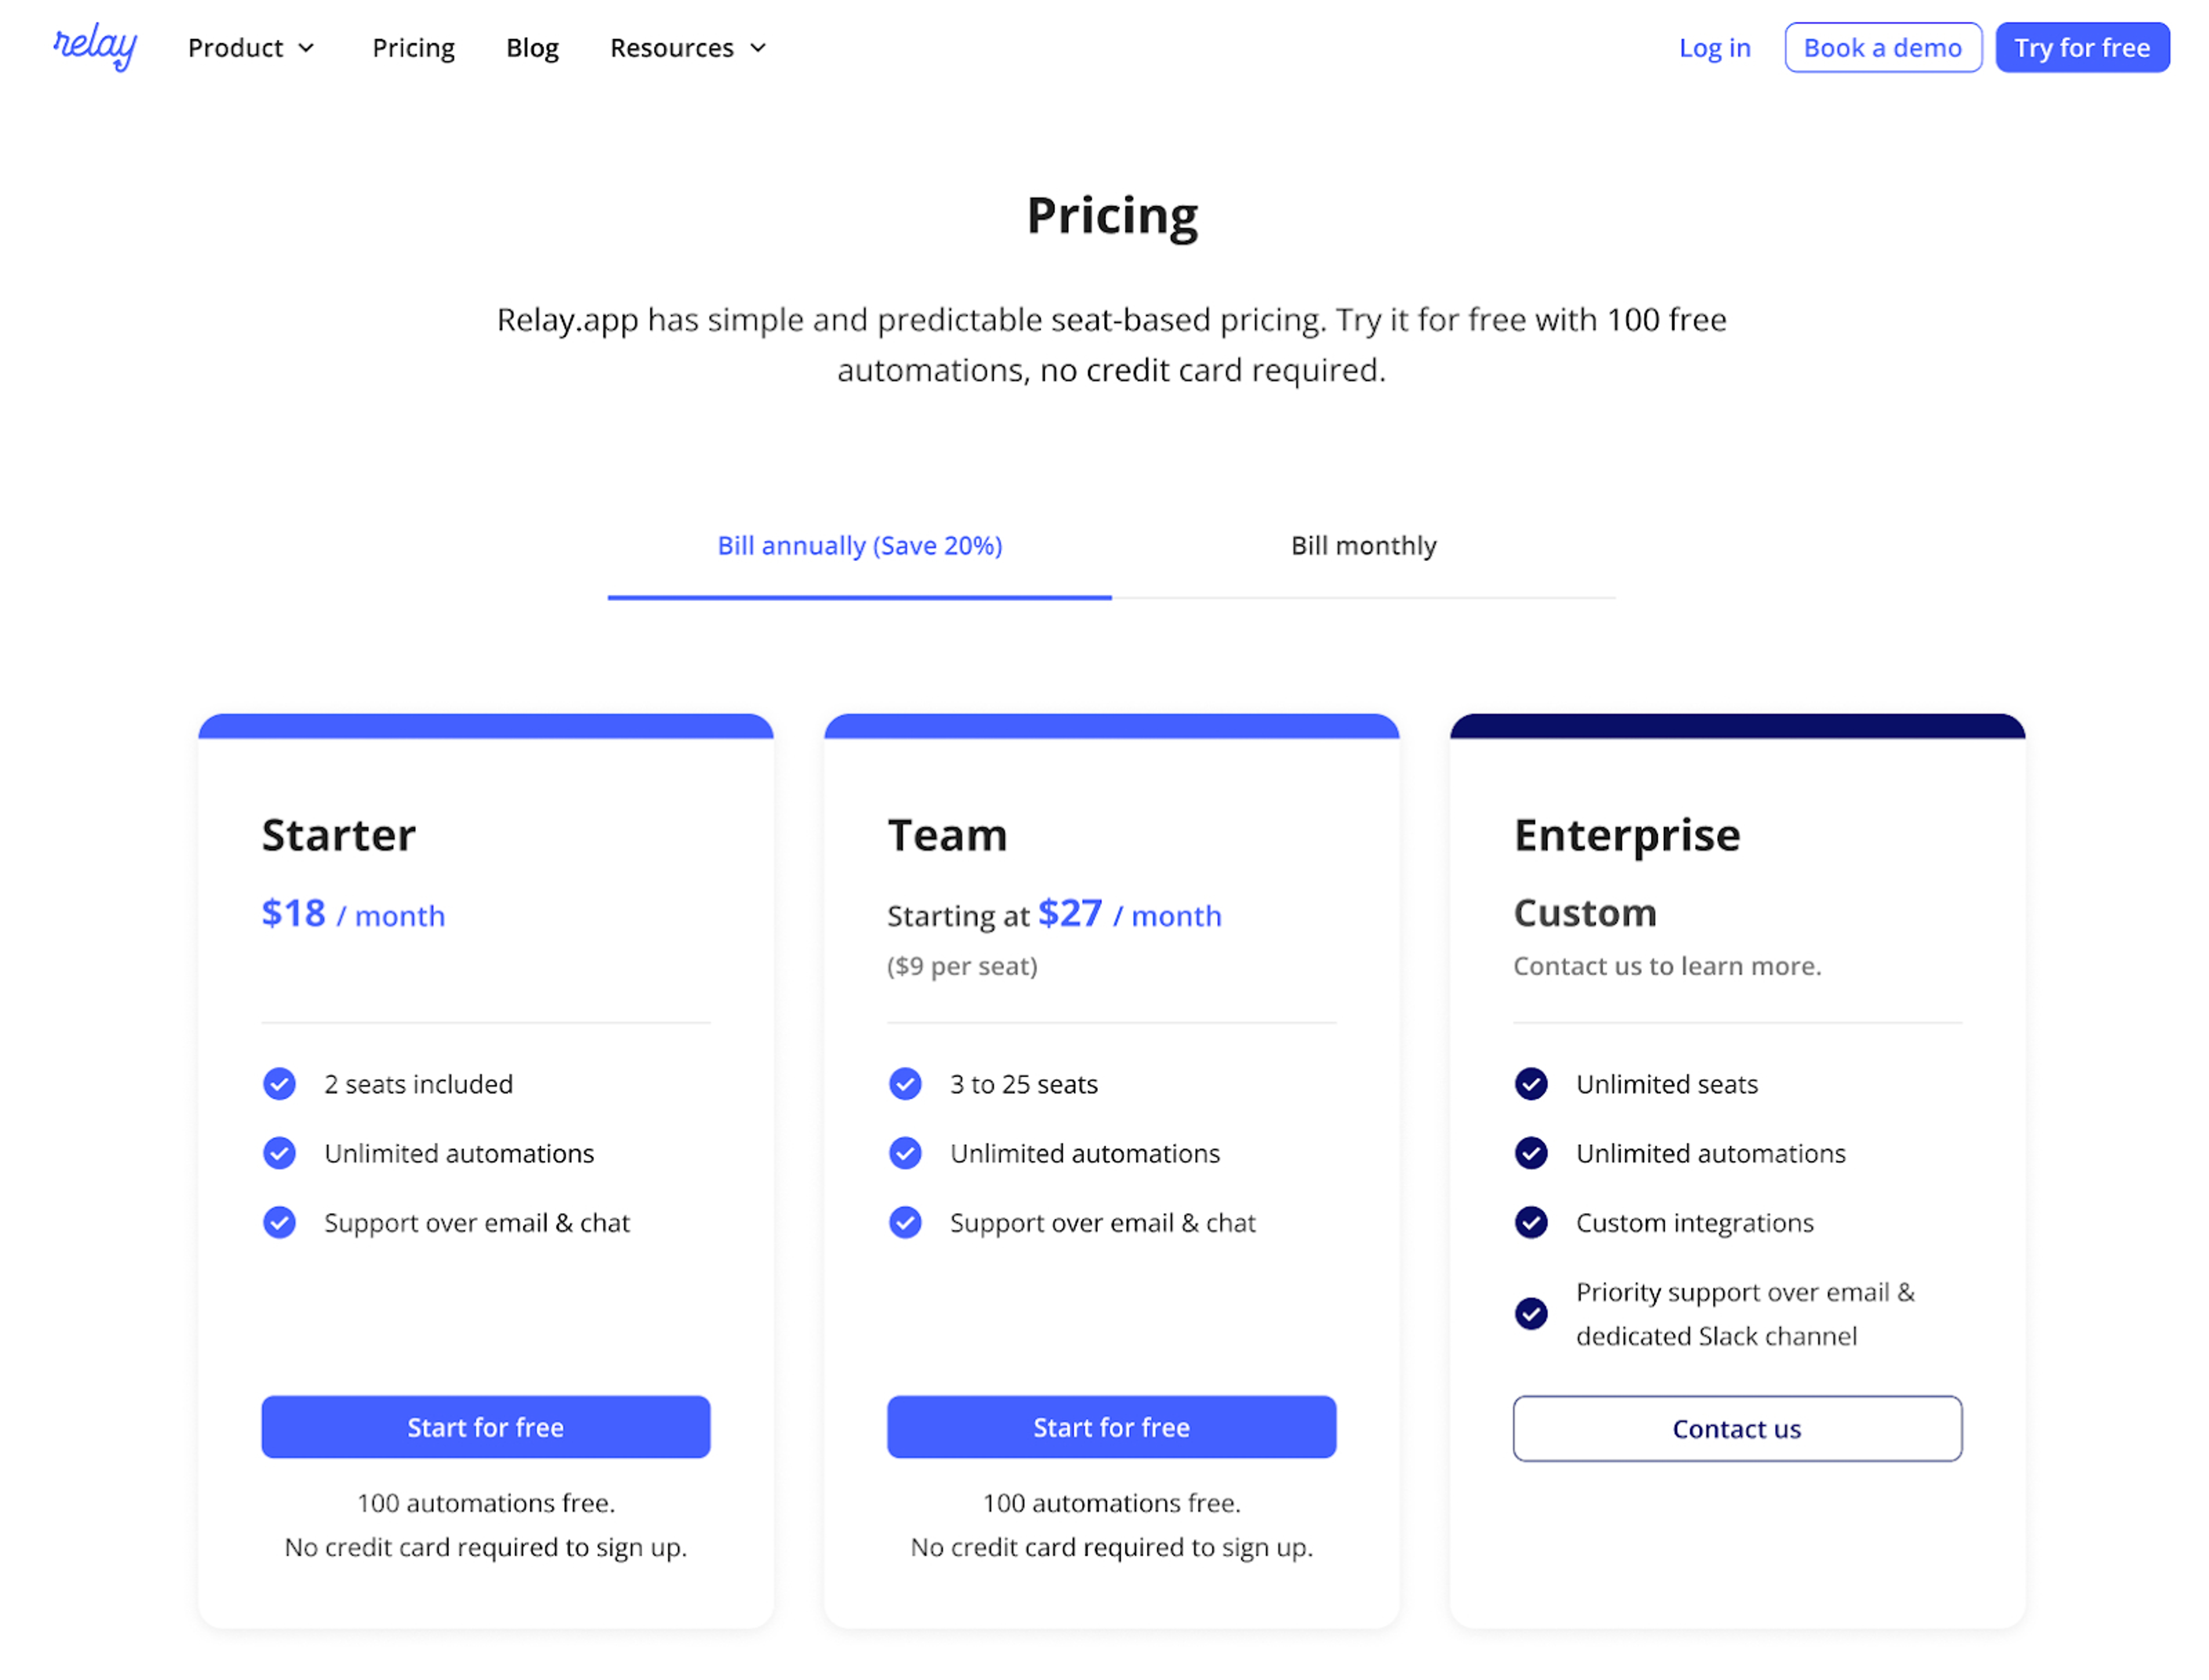 Relay.app pricing page